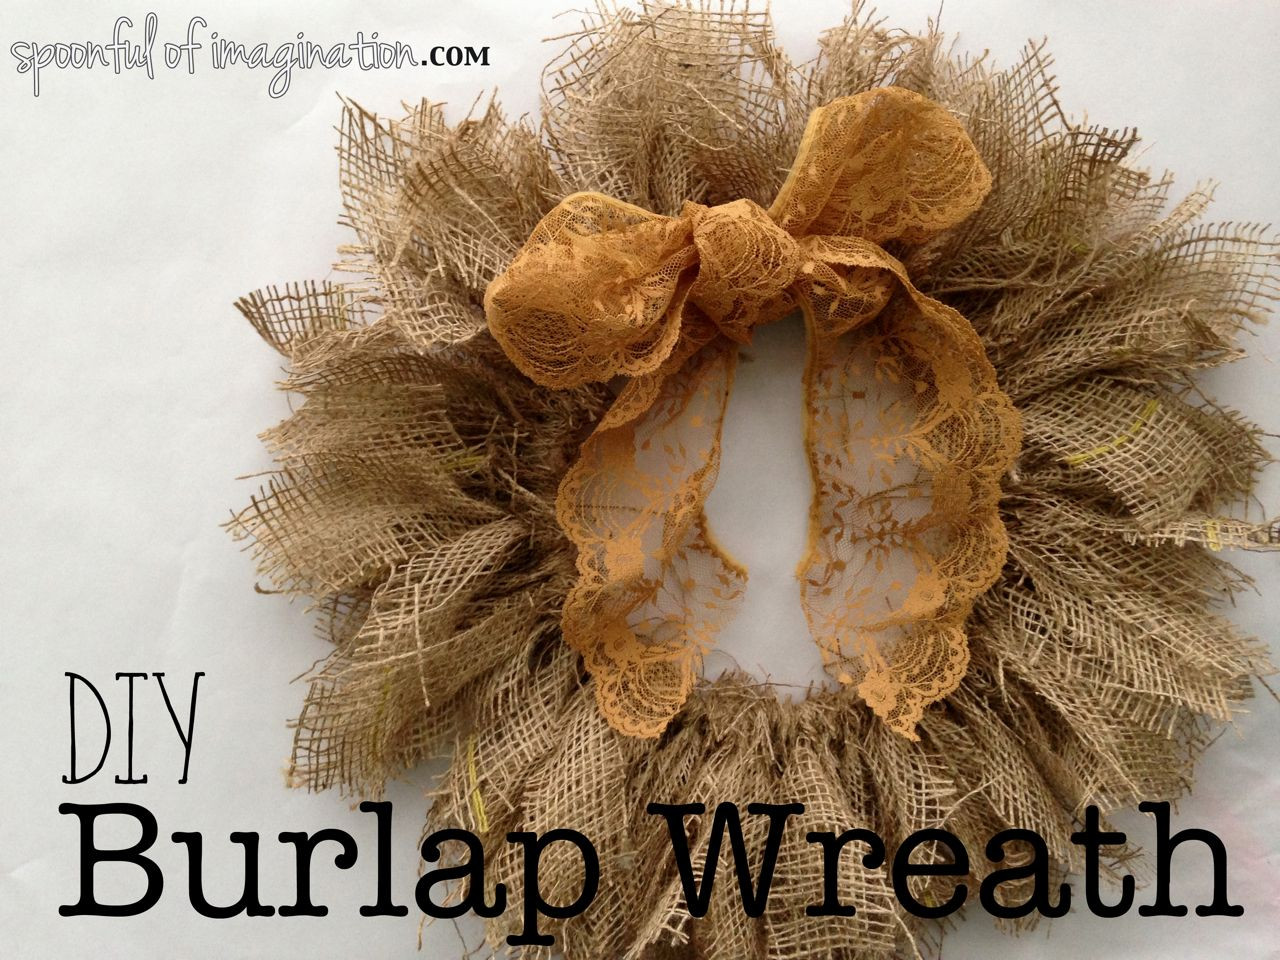 Best ideas about DIY Burlap Wreath
. Save or Pin DIY easy Burlap Wreath Spoonful of Imagination Now.